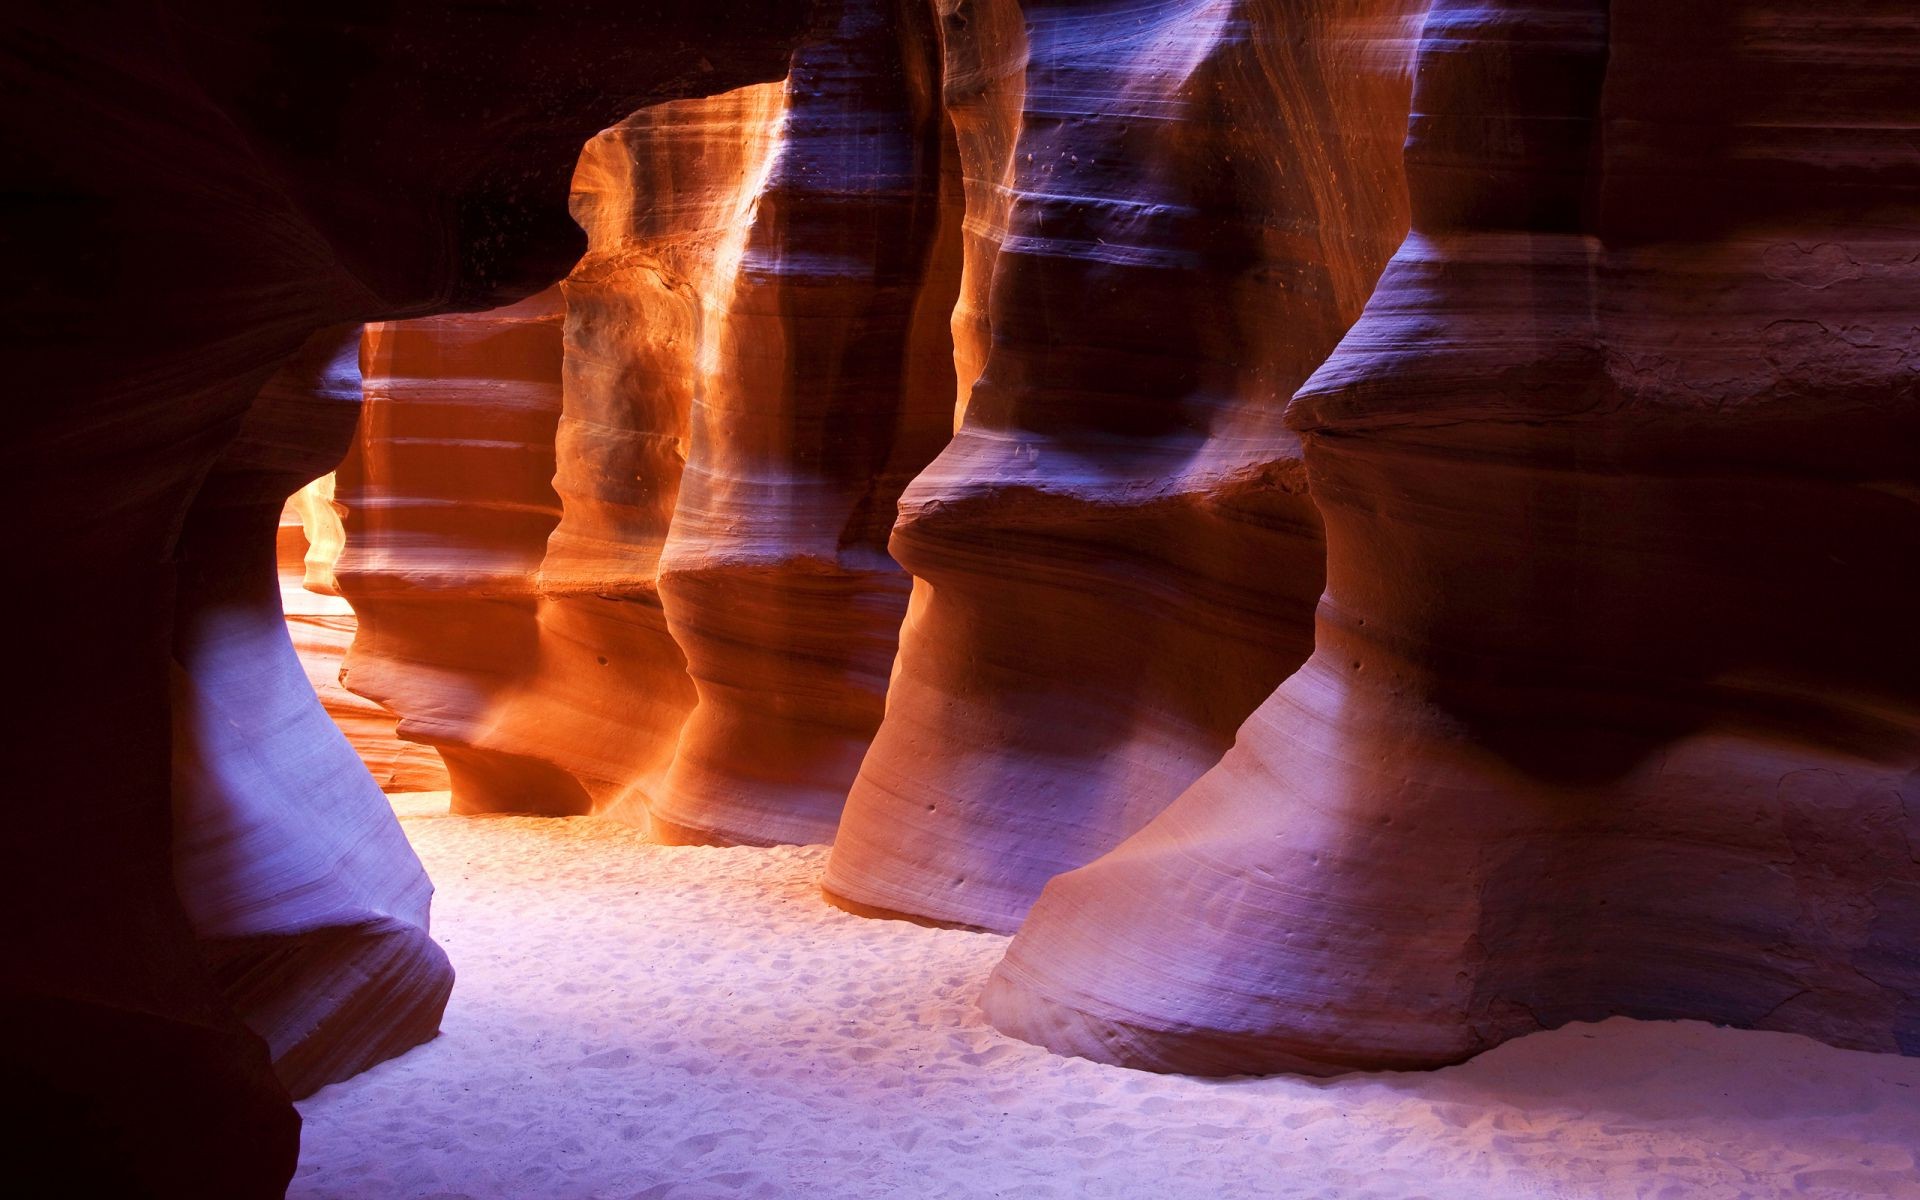 the canyons blur travel canyon light sandstone motion water